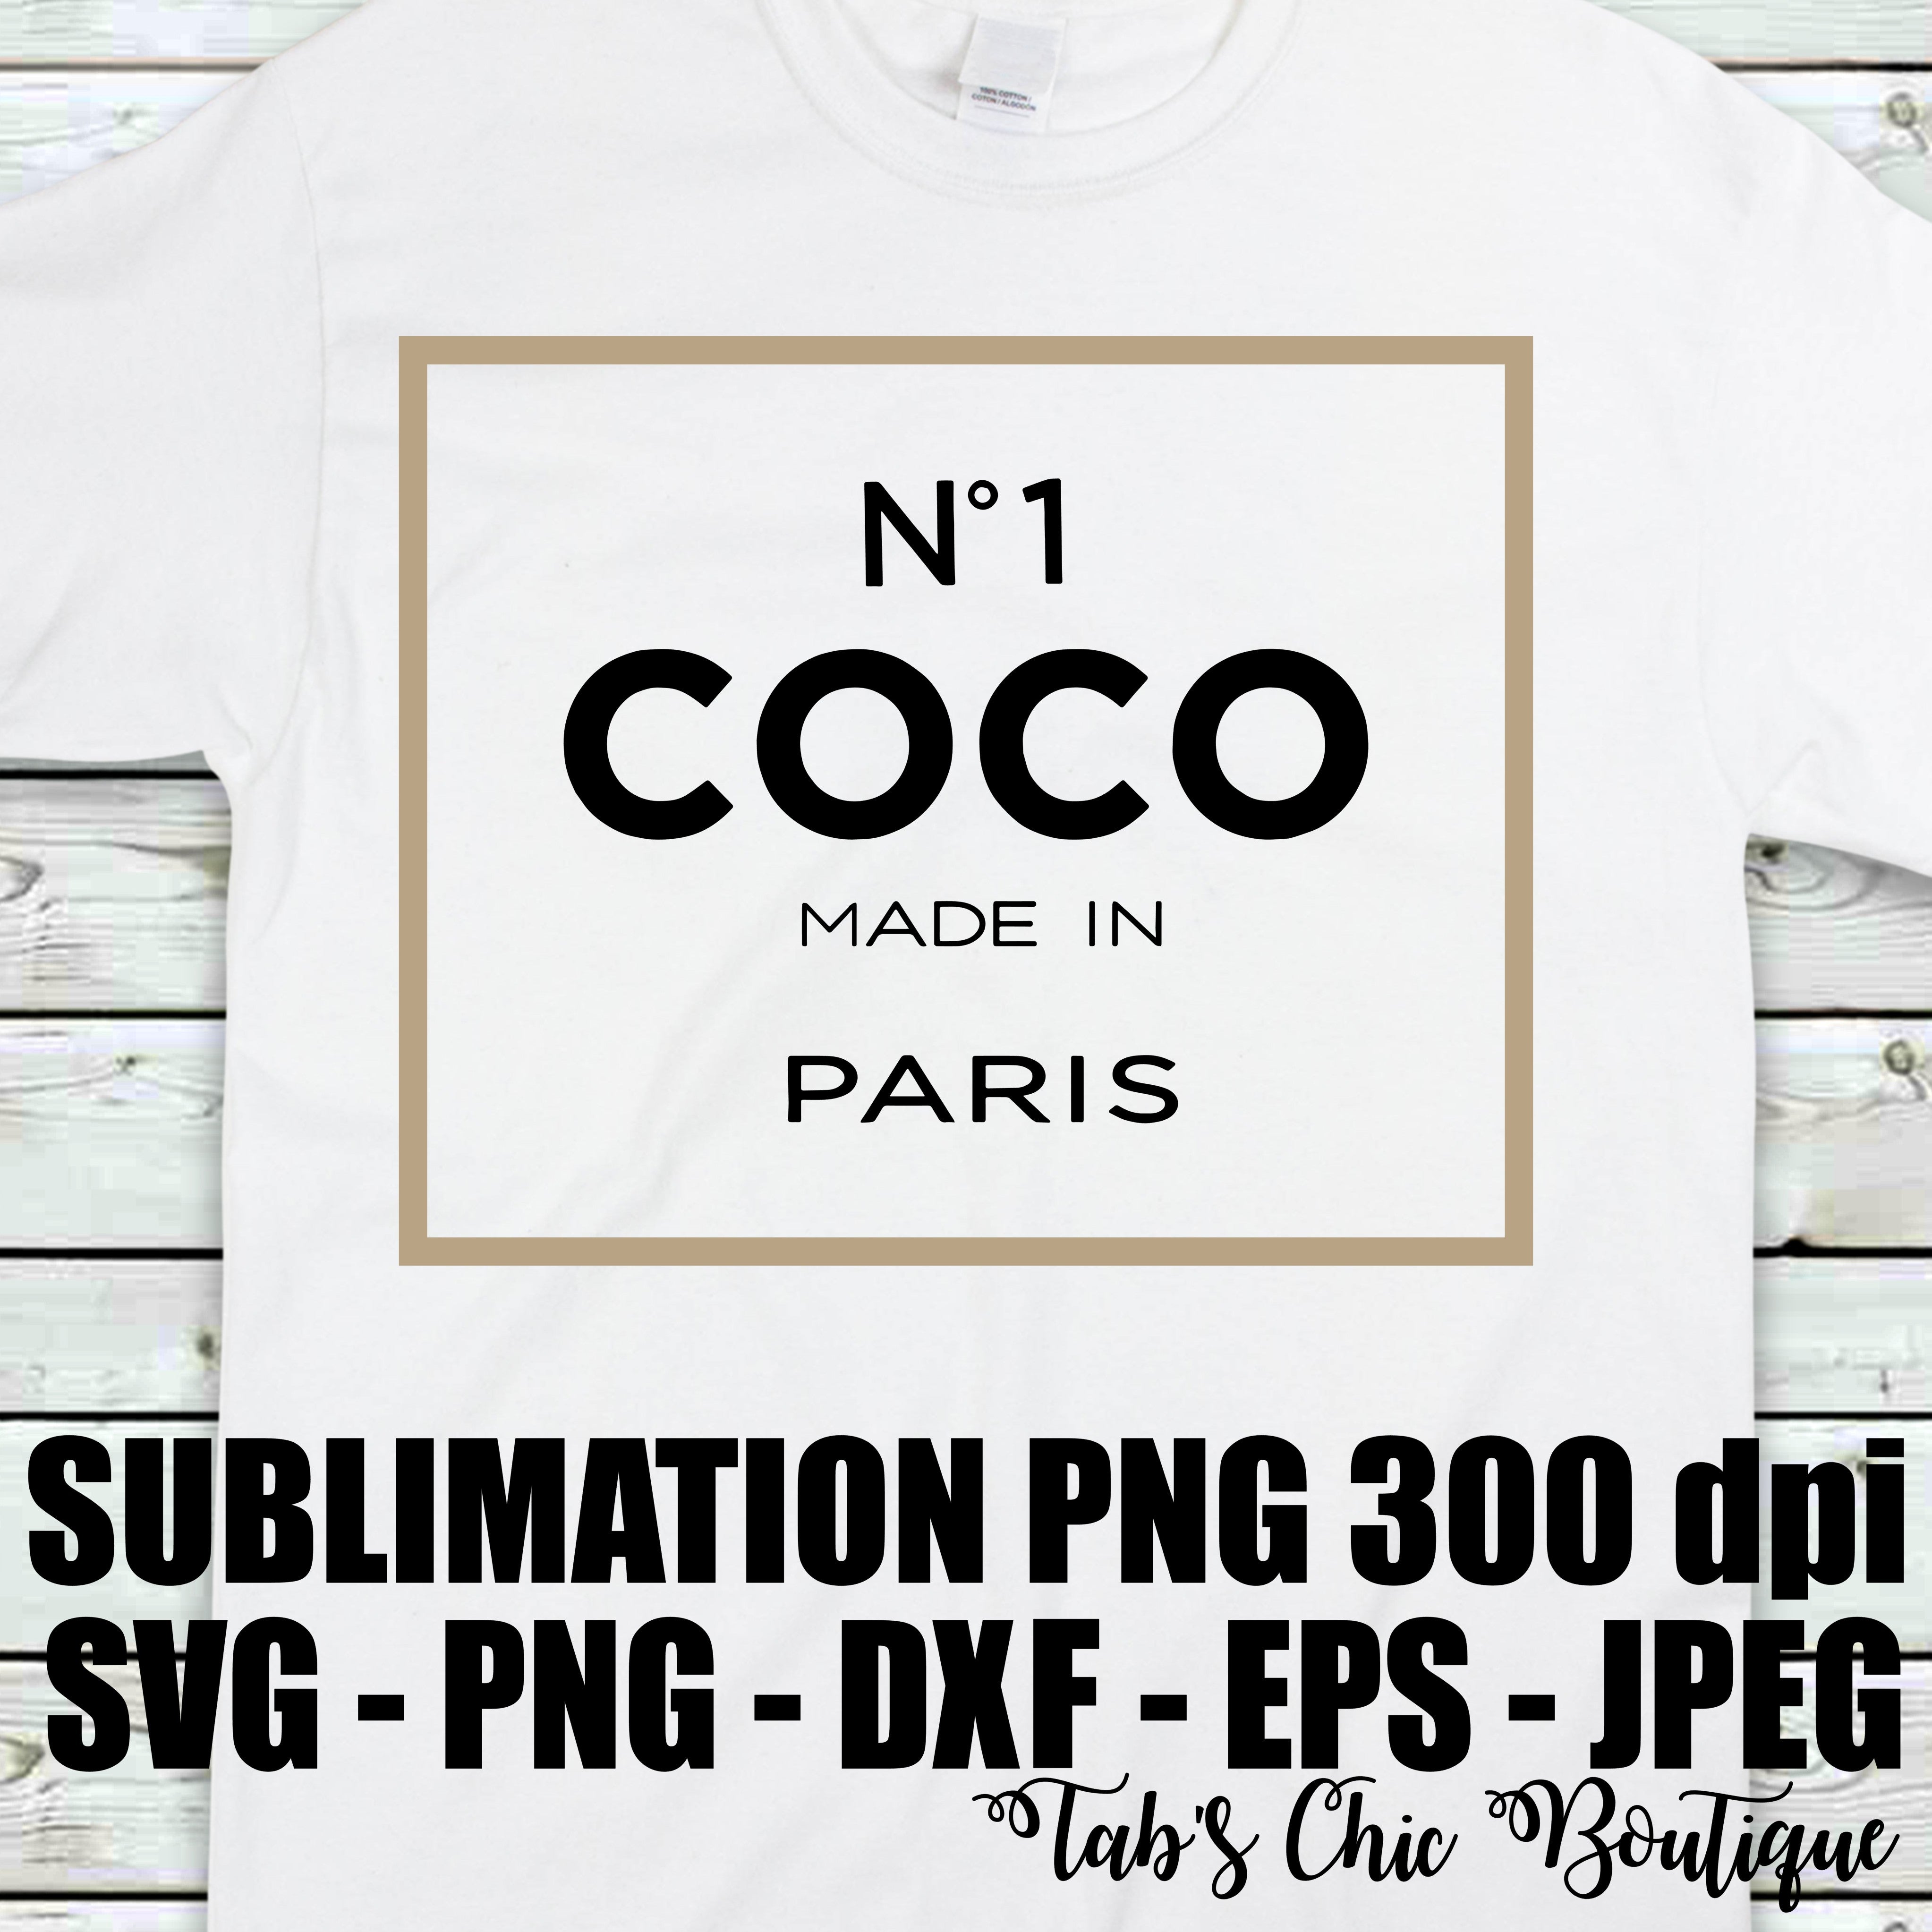 Download N 1 Coco Made In Paris Svg Jpeg High Def Png 300dpi Dxf Eps Sublimati Tab S Chic Boutique